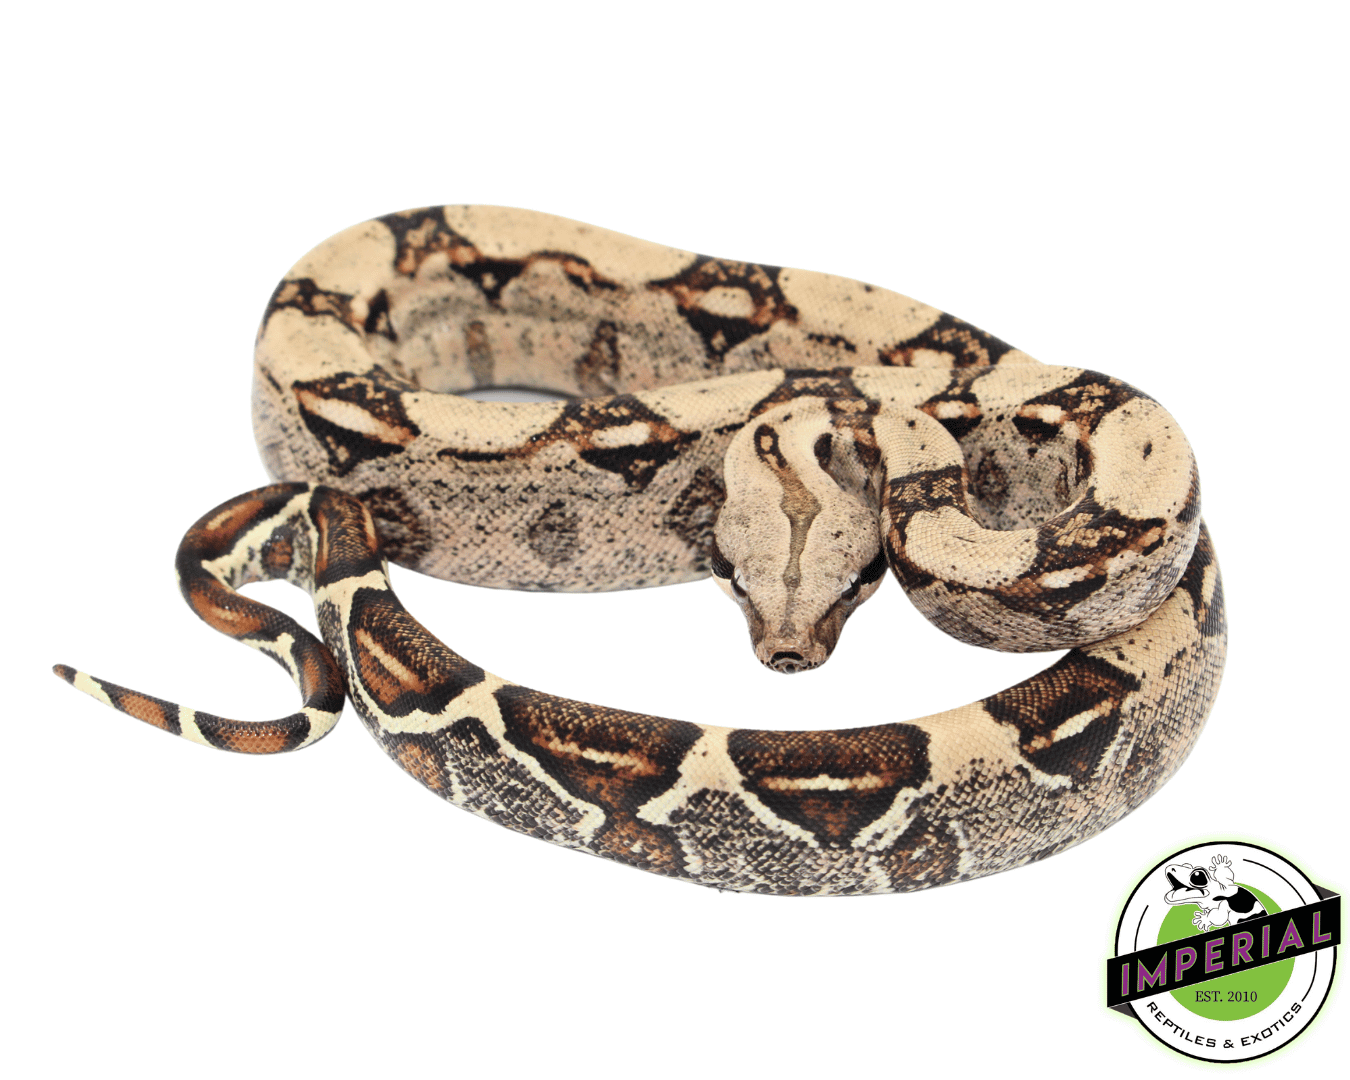 colombian red tail boa constrictor for sale, buy reptiles online